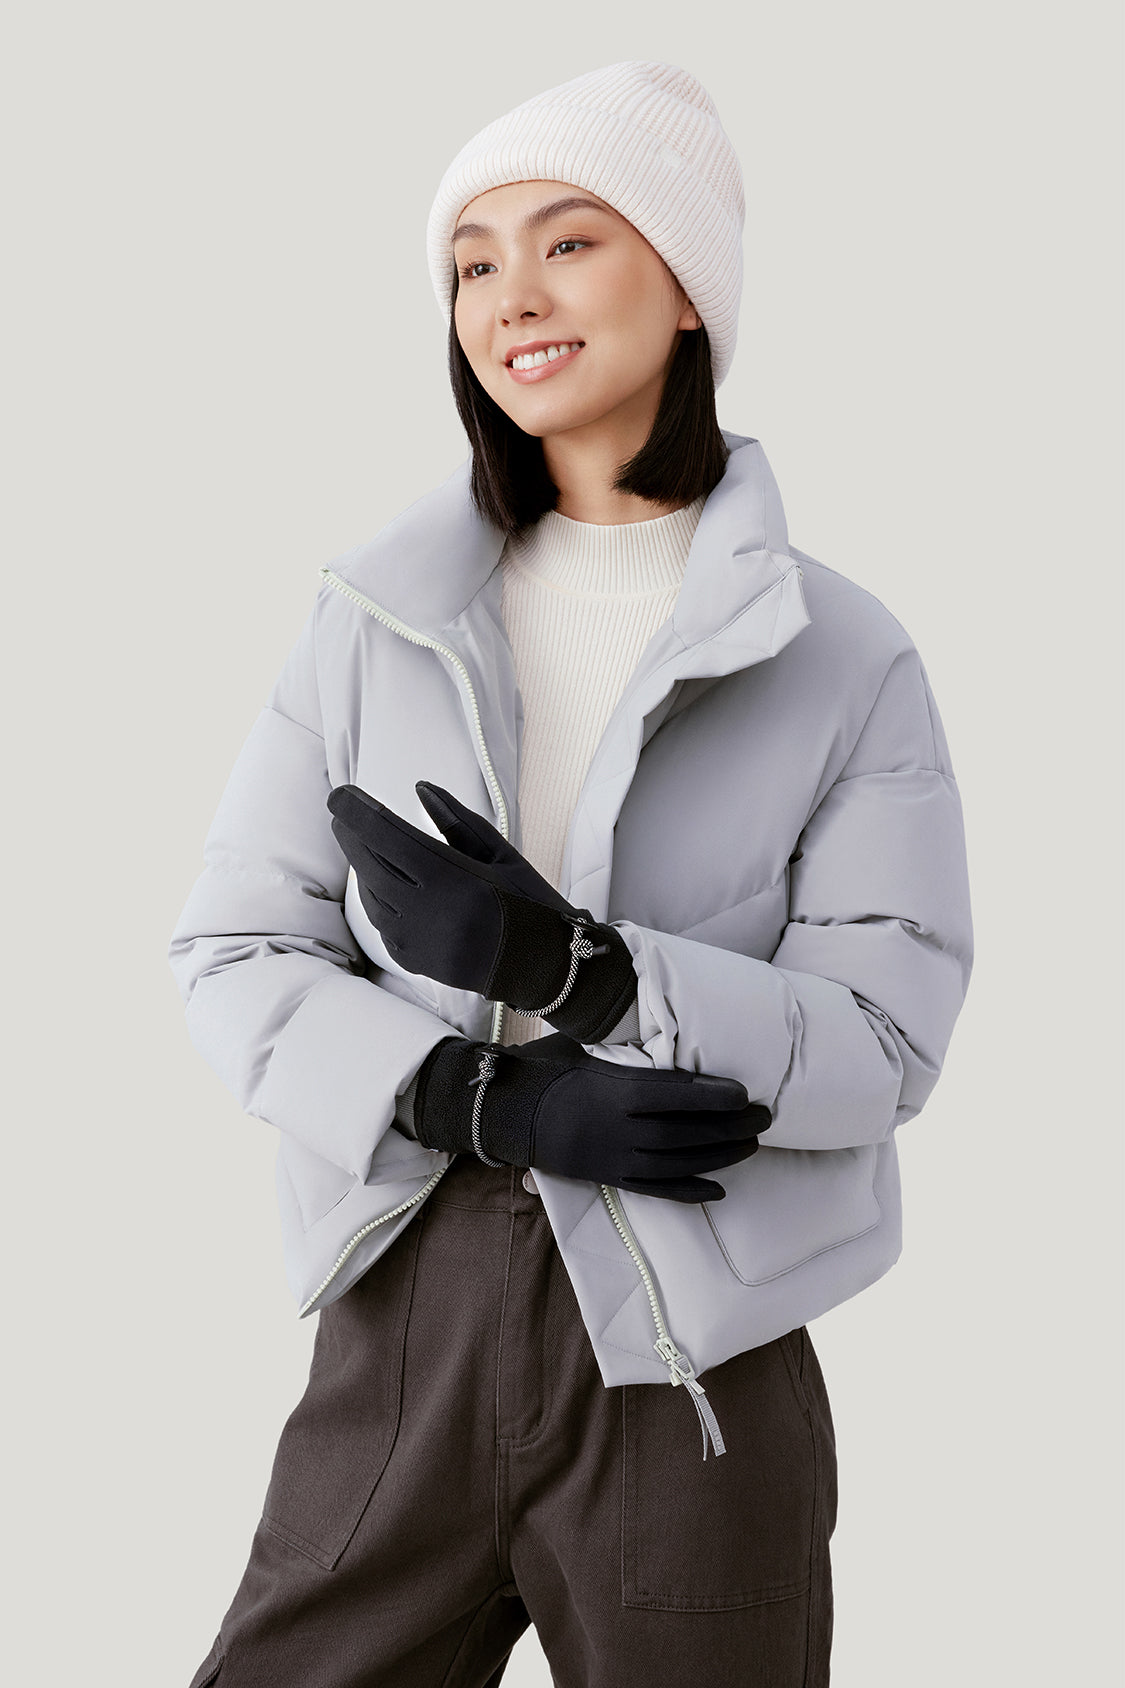 Beneunder Winter Touch Screen Thermal Glove 